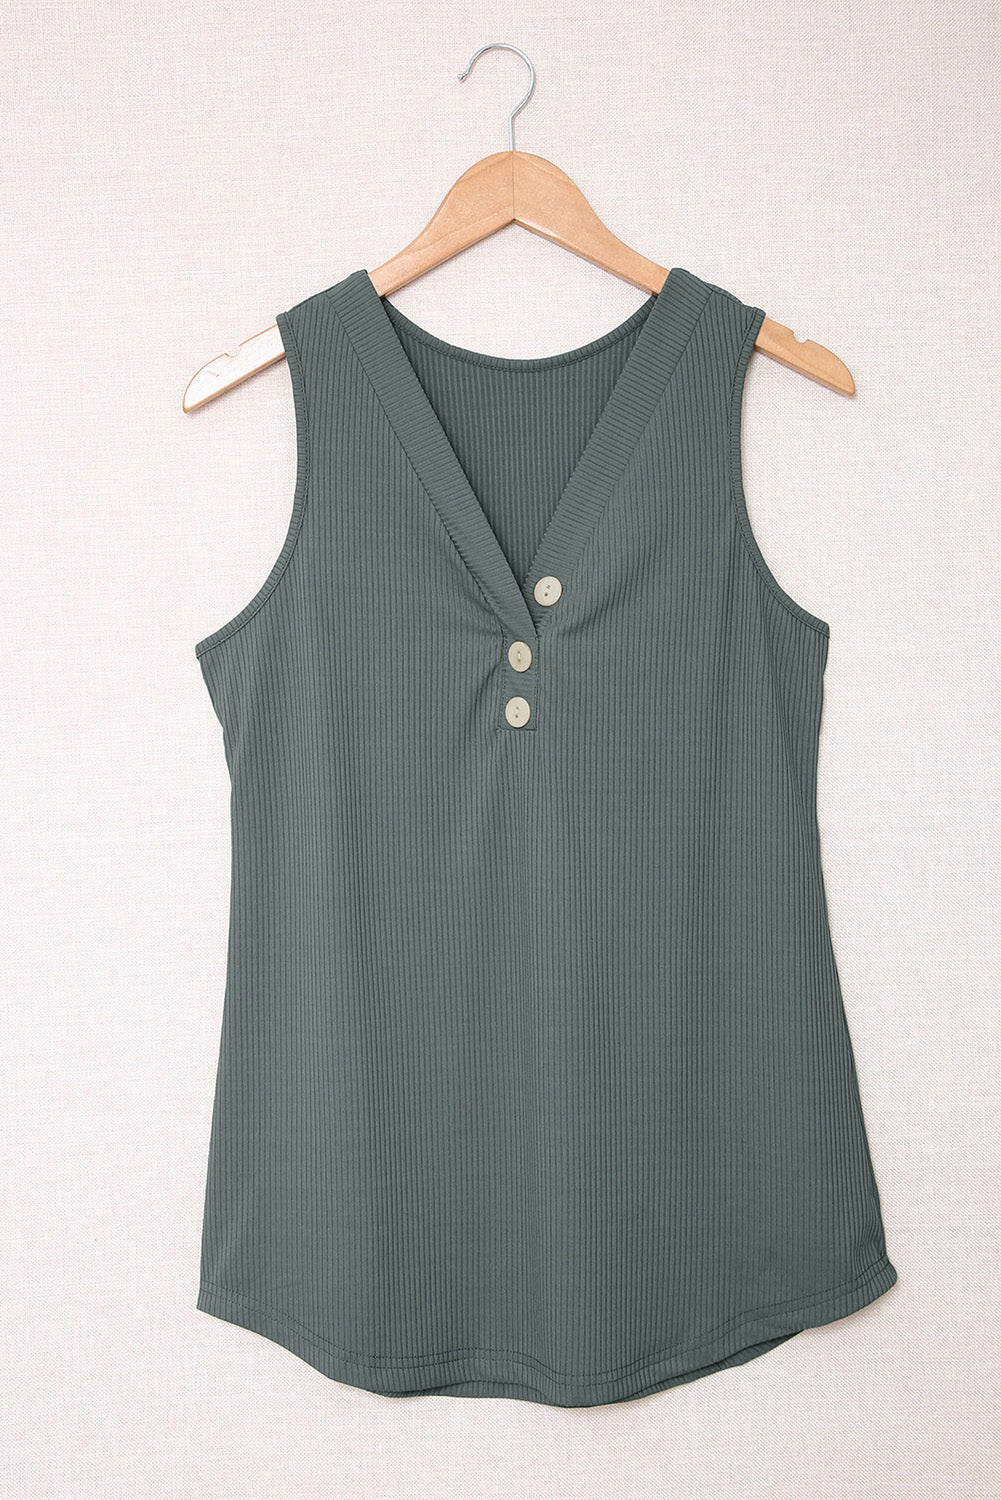 Green Solid Color Buttons V Neck Ribbed Tank Top Tank Tops JT's Designer Fashion